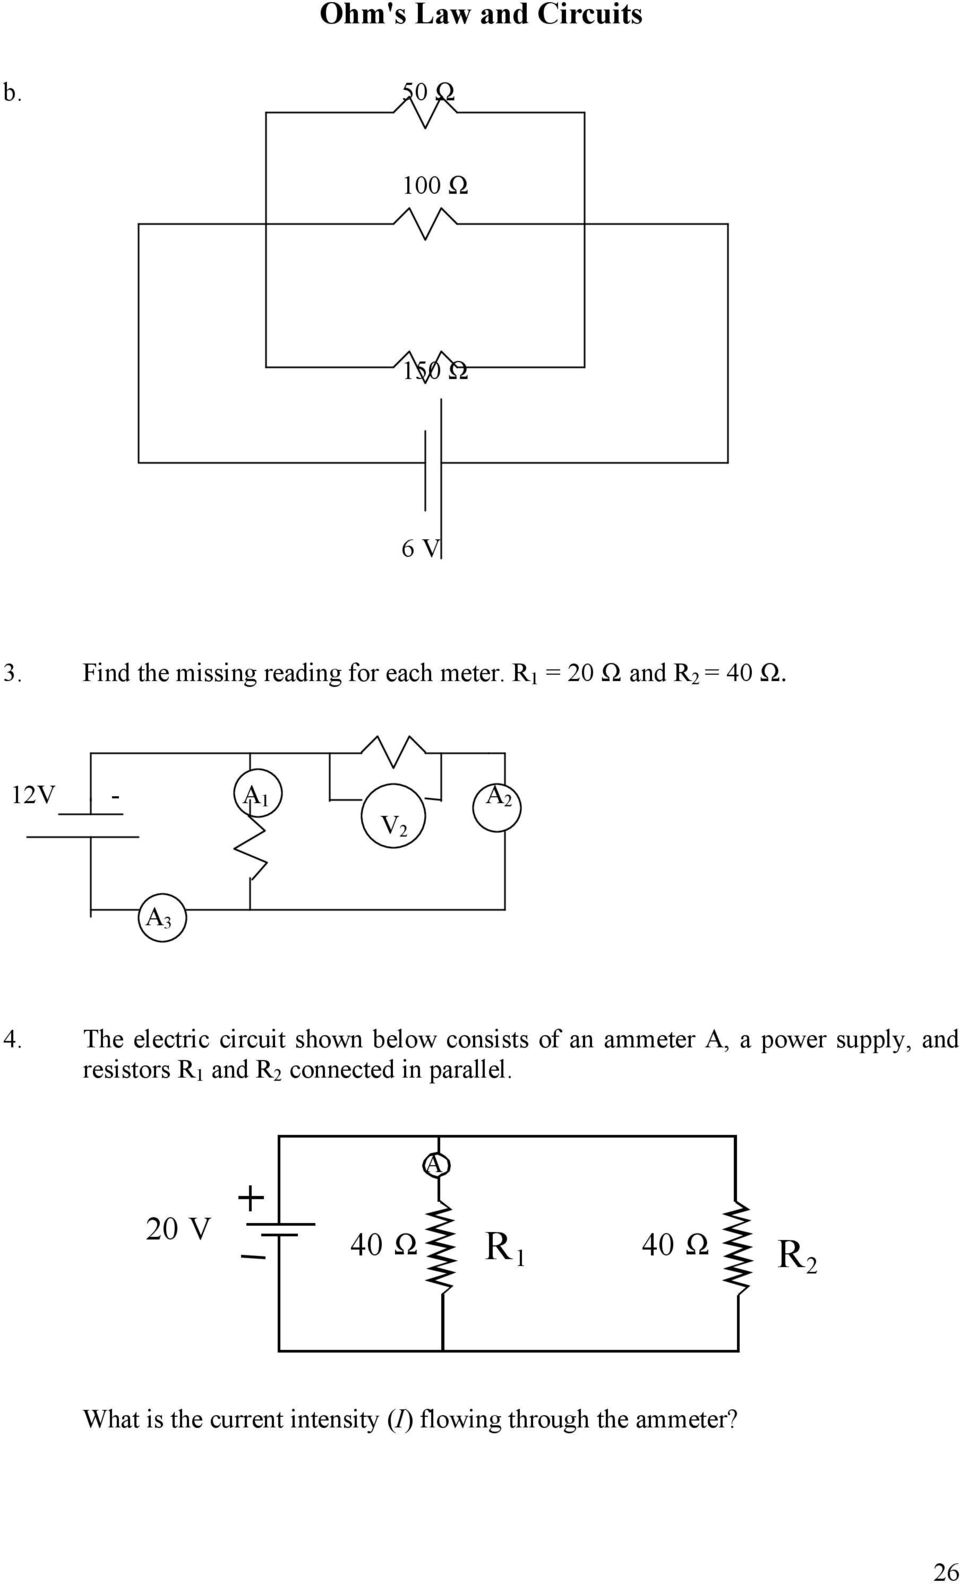 The electric circuit shown below consists of an ammeter A, a power supply, and